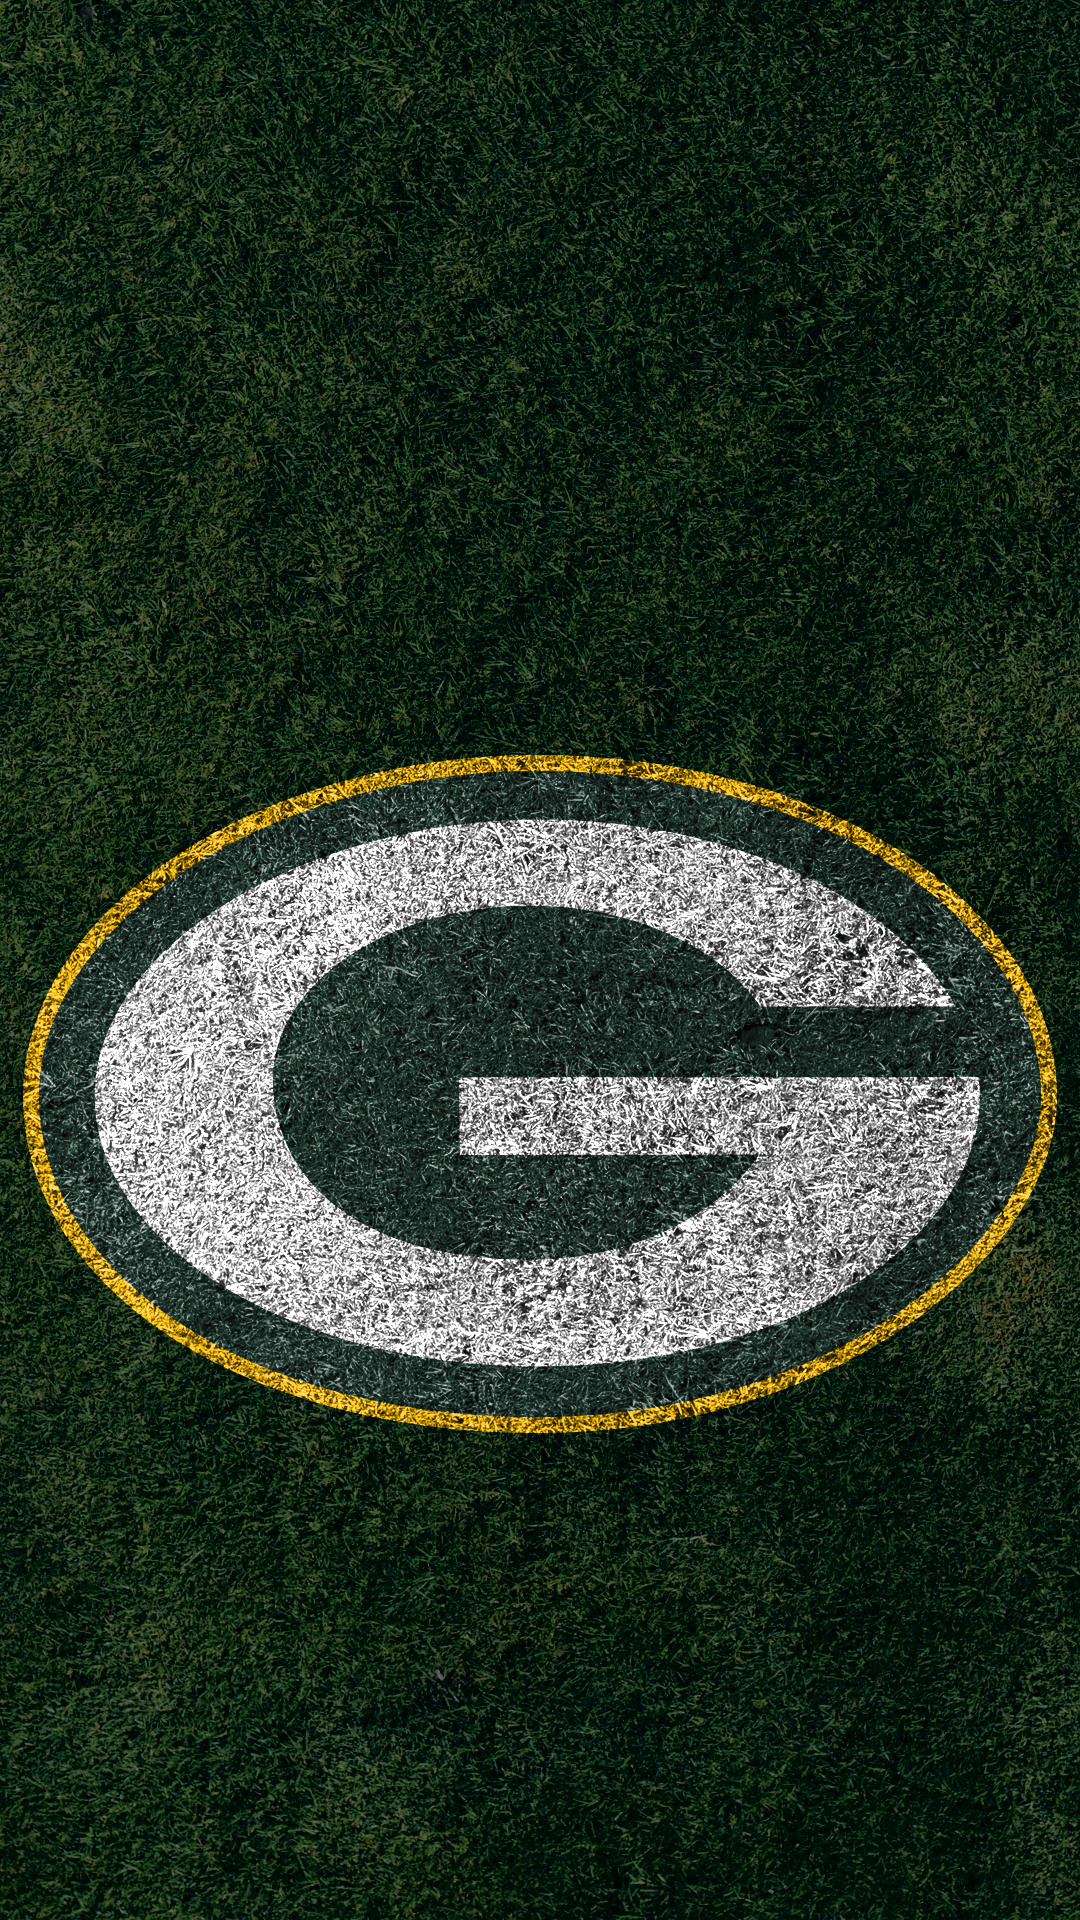 Green Bay Packers: A professional American football team based in Green Bay, Wisconsin. 1080x1920 Full HD Background.